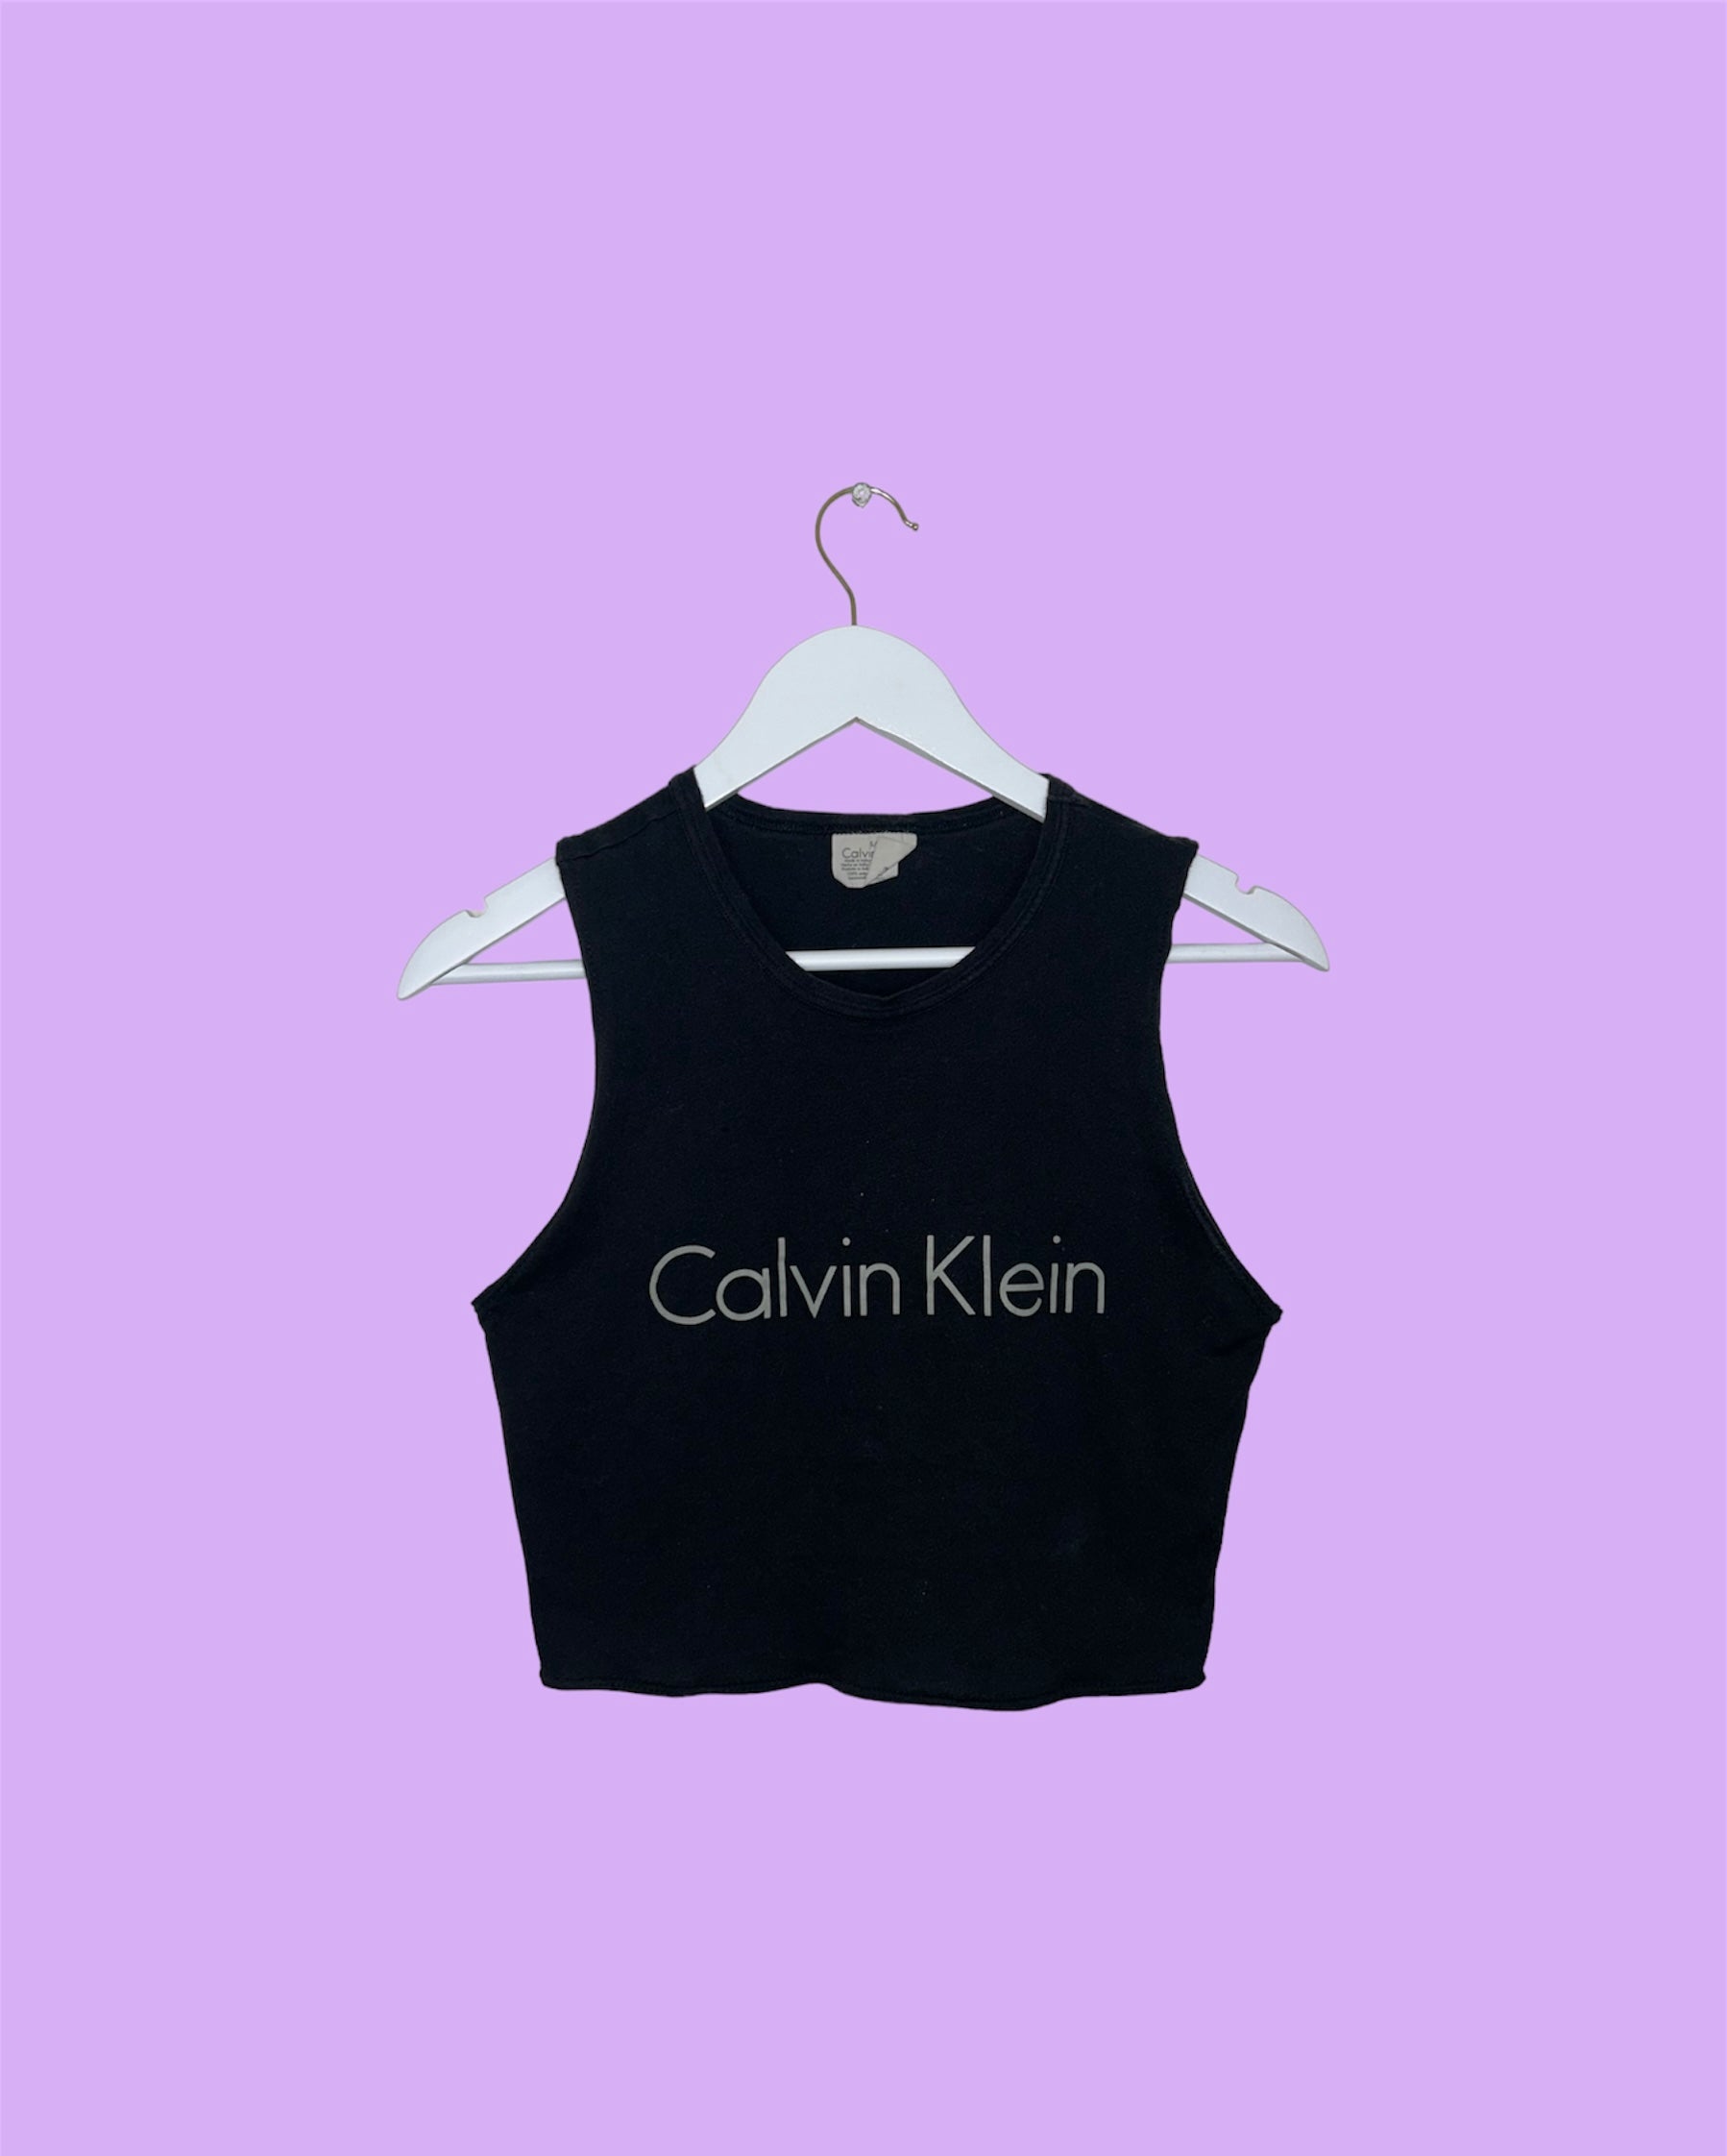 black sleeveless crop top with grey calvin klein logo on a lilac background